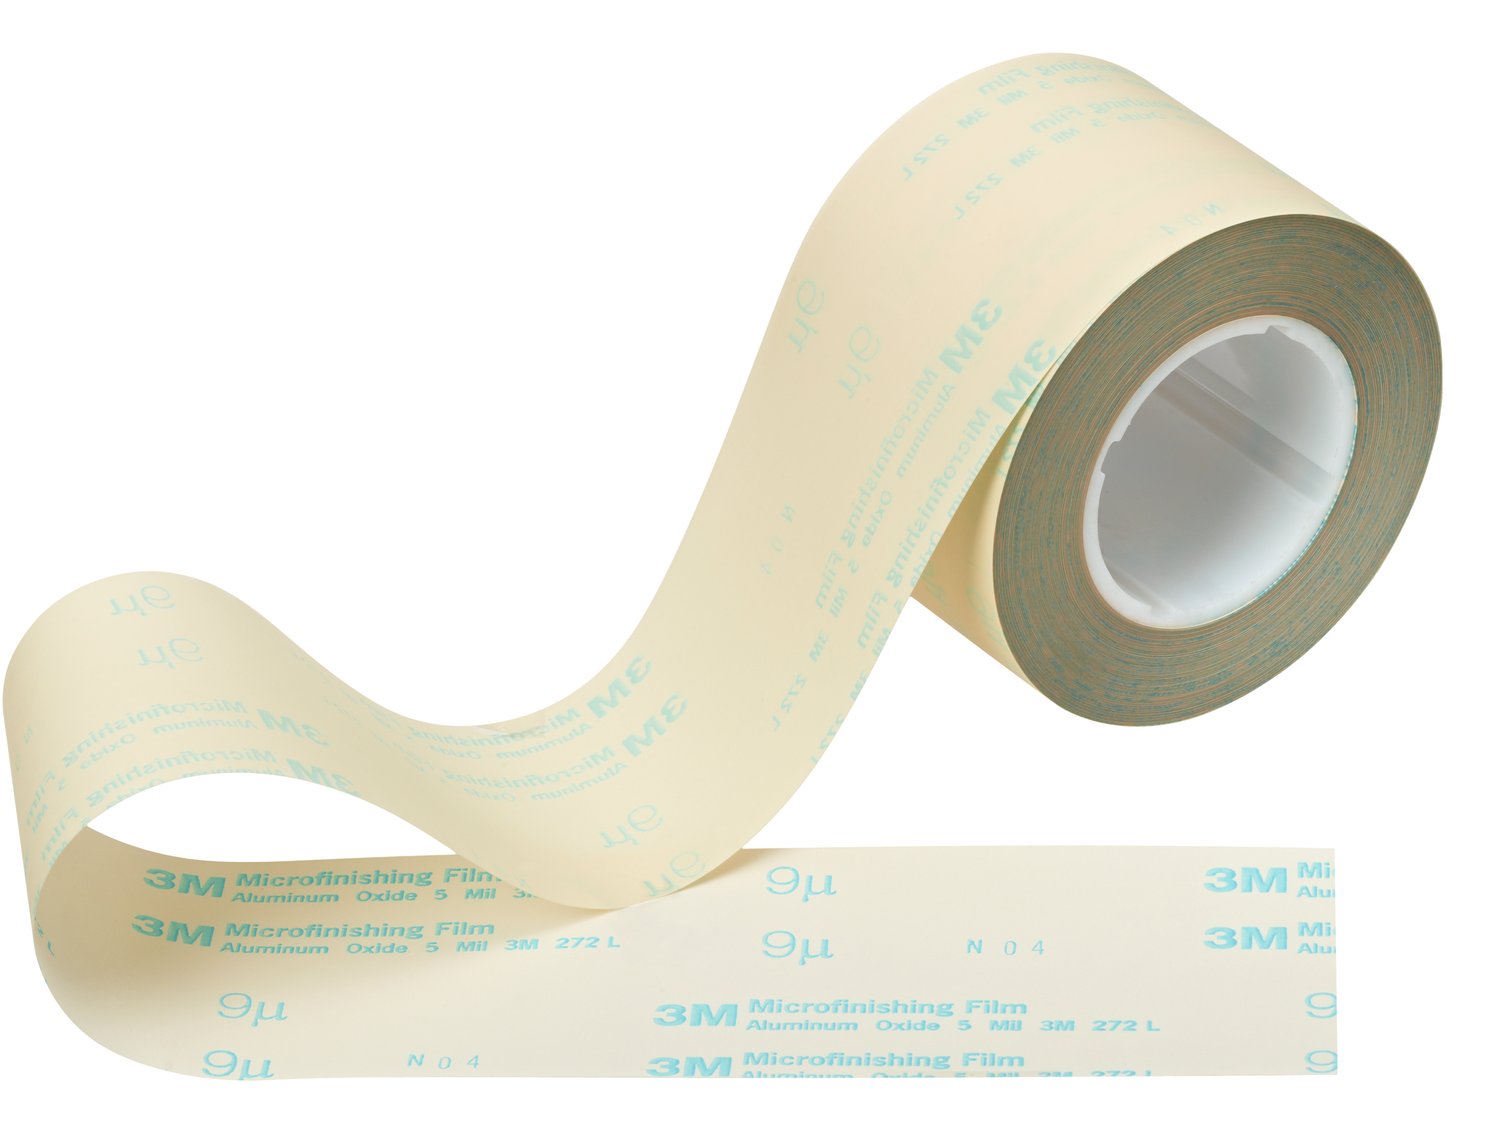 7010533557 - 3M Microfinishing Film Roll 272L, 40 Mic 5MIL, Type UK, 12 in x 150 ft
x 3 in (304.8mmx45.75m), Keyed Core, ASO